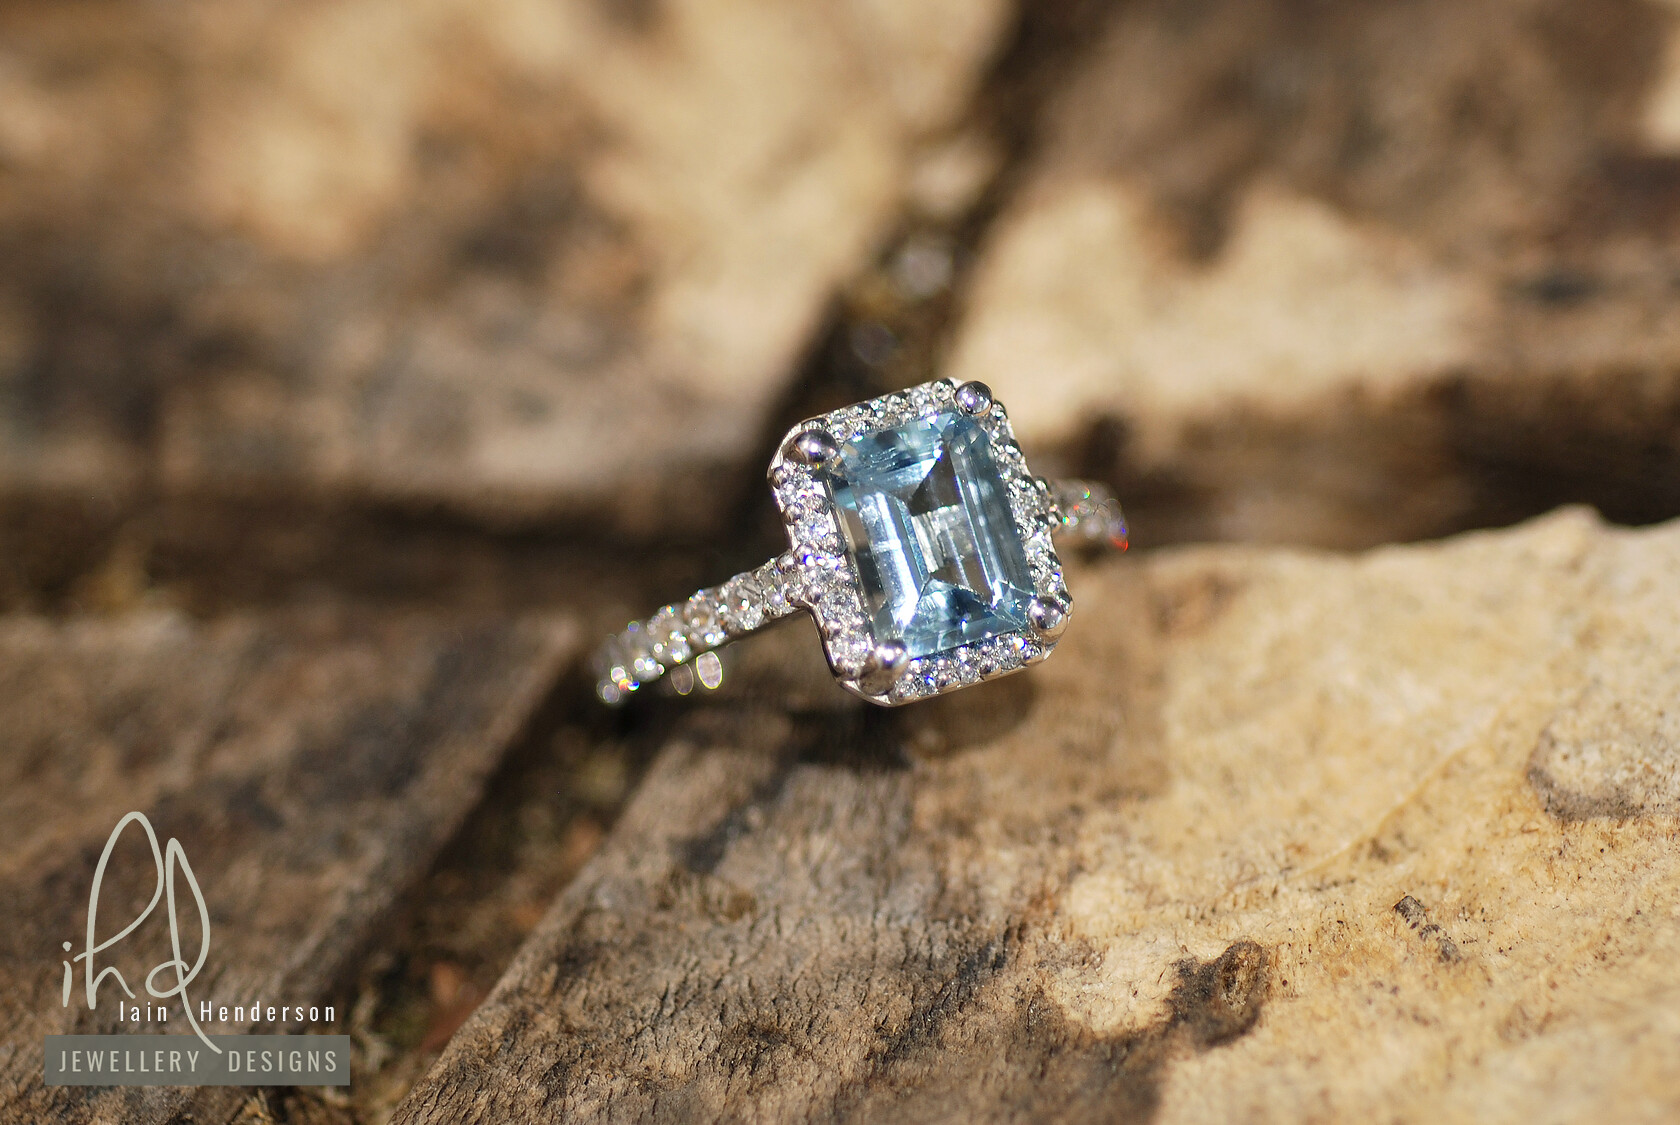 Aqua marine halo style engagement ring with diamonds on the shoulders